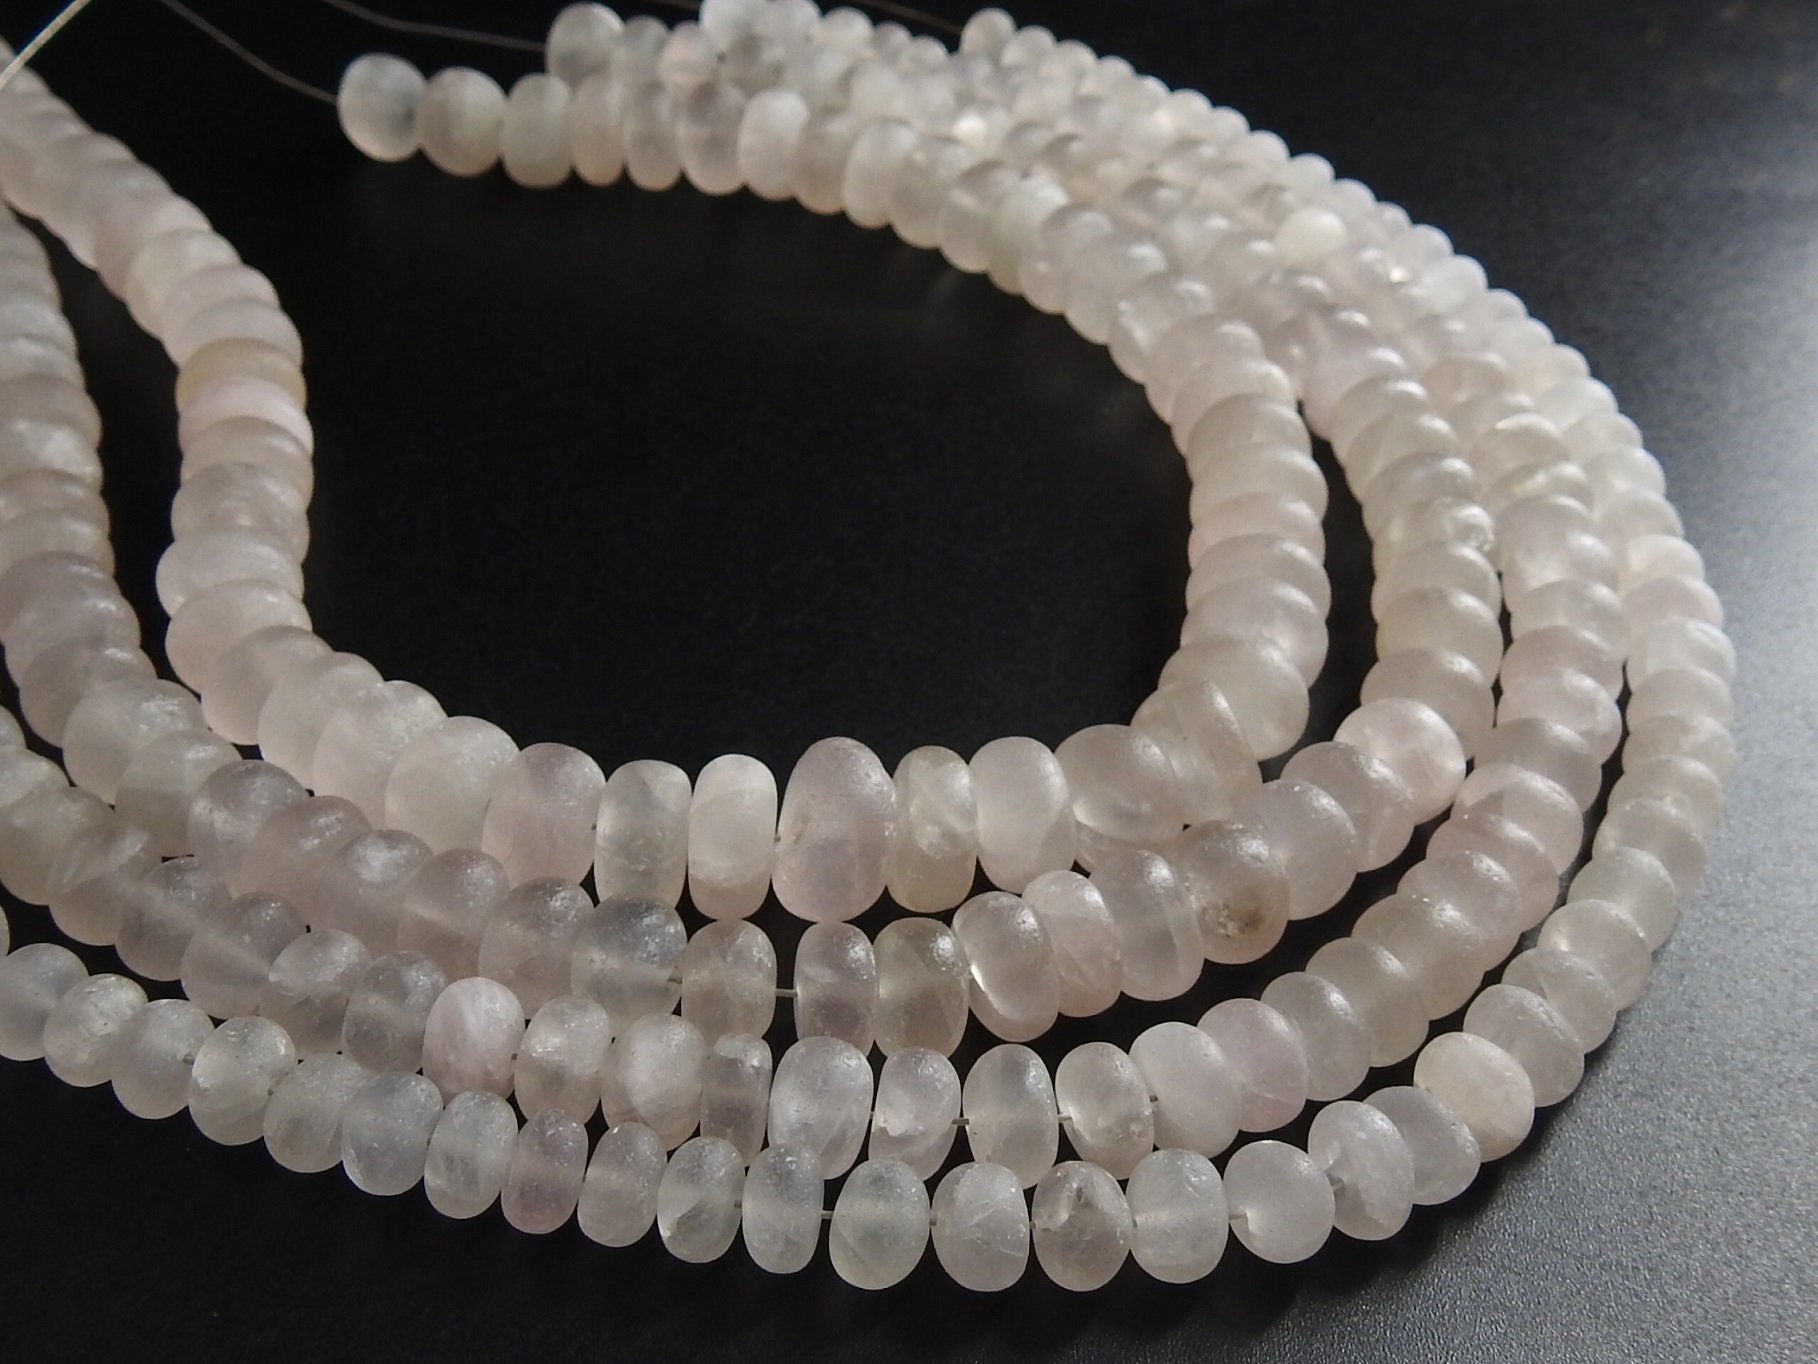 12 Inch Strand Natural Rose Quartz Smooth Matte Polished Roundel Beads Wholesale Price New Arrival B3 | Save 33% - Rajasthan Living 16